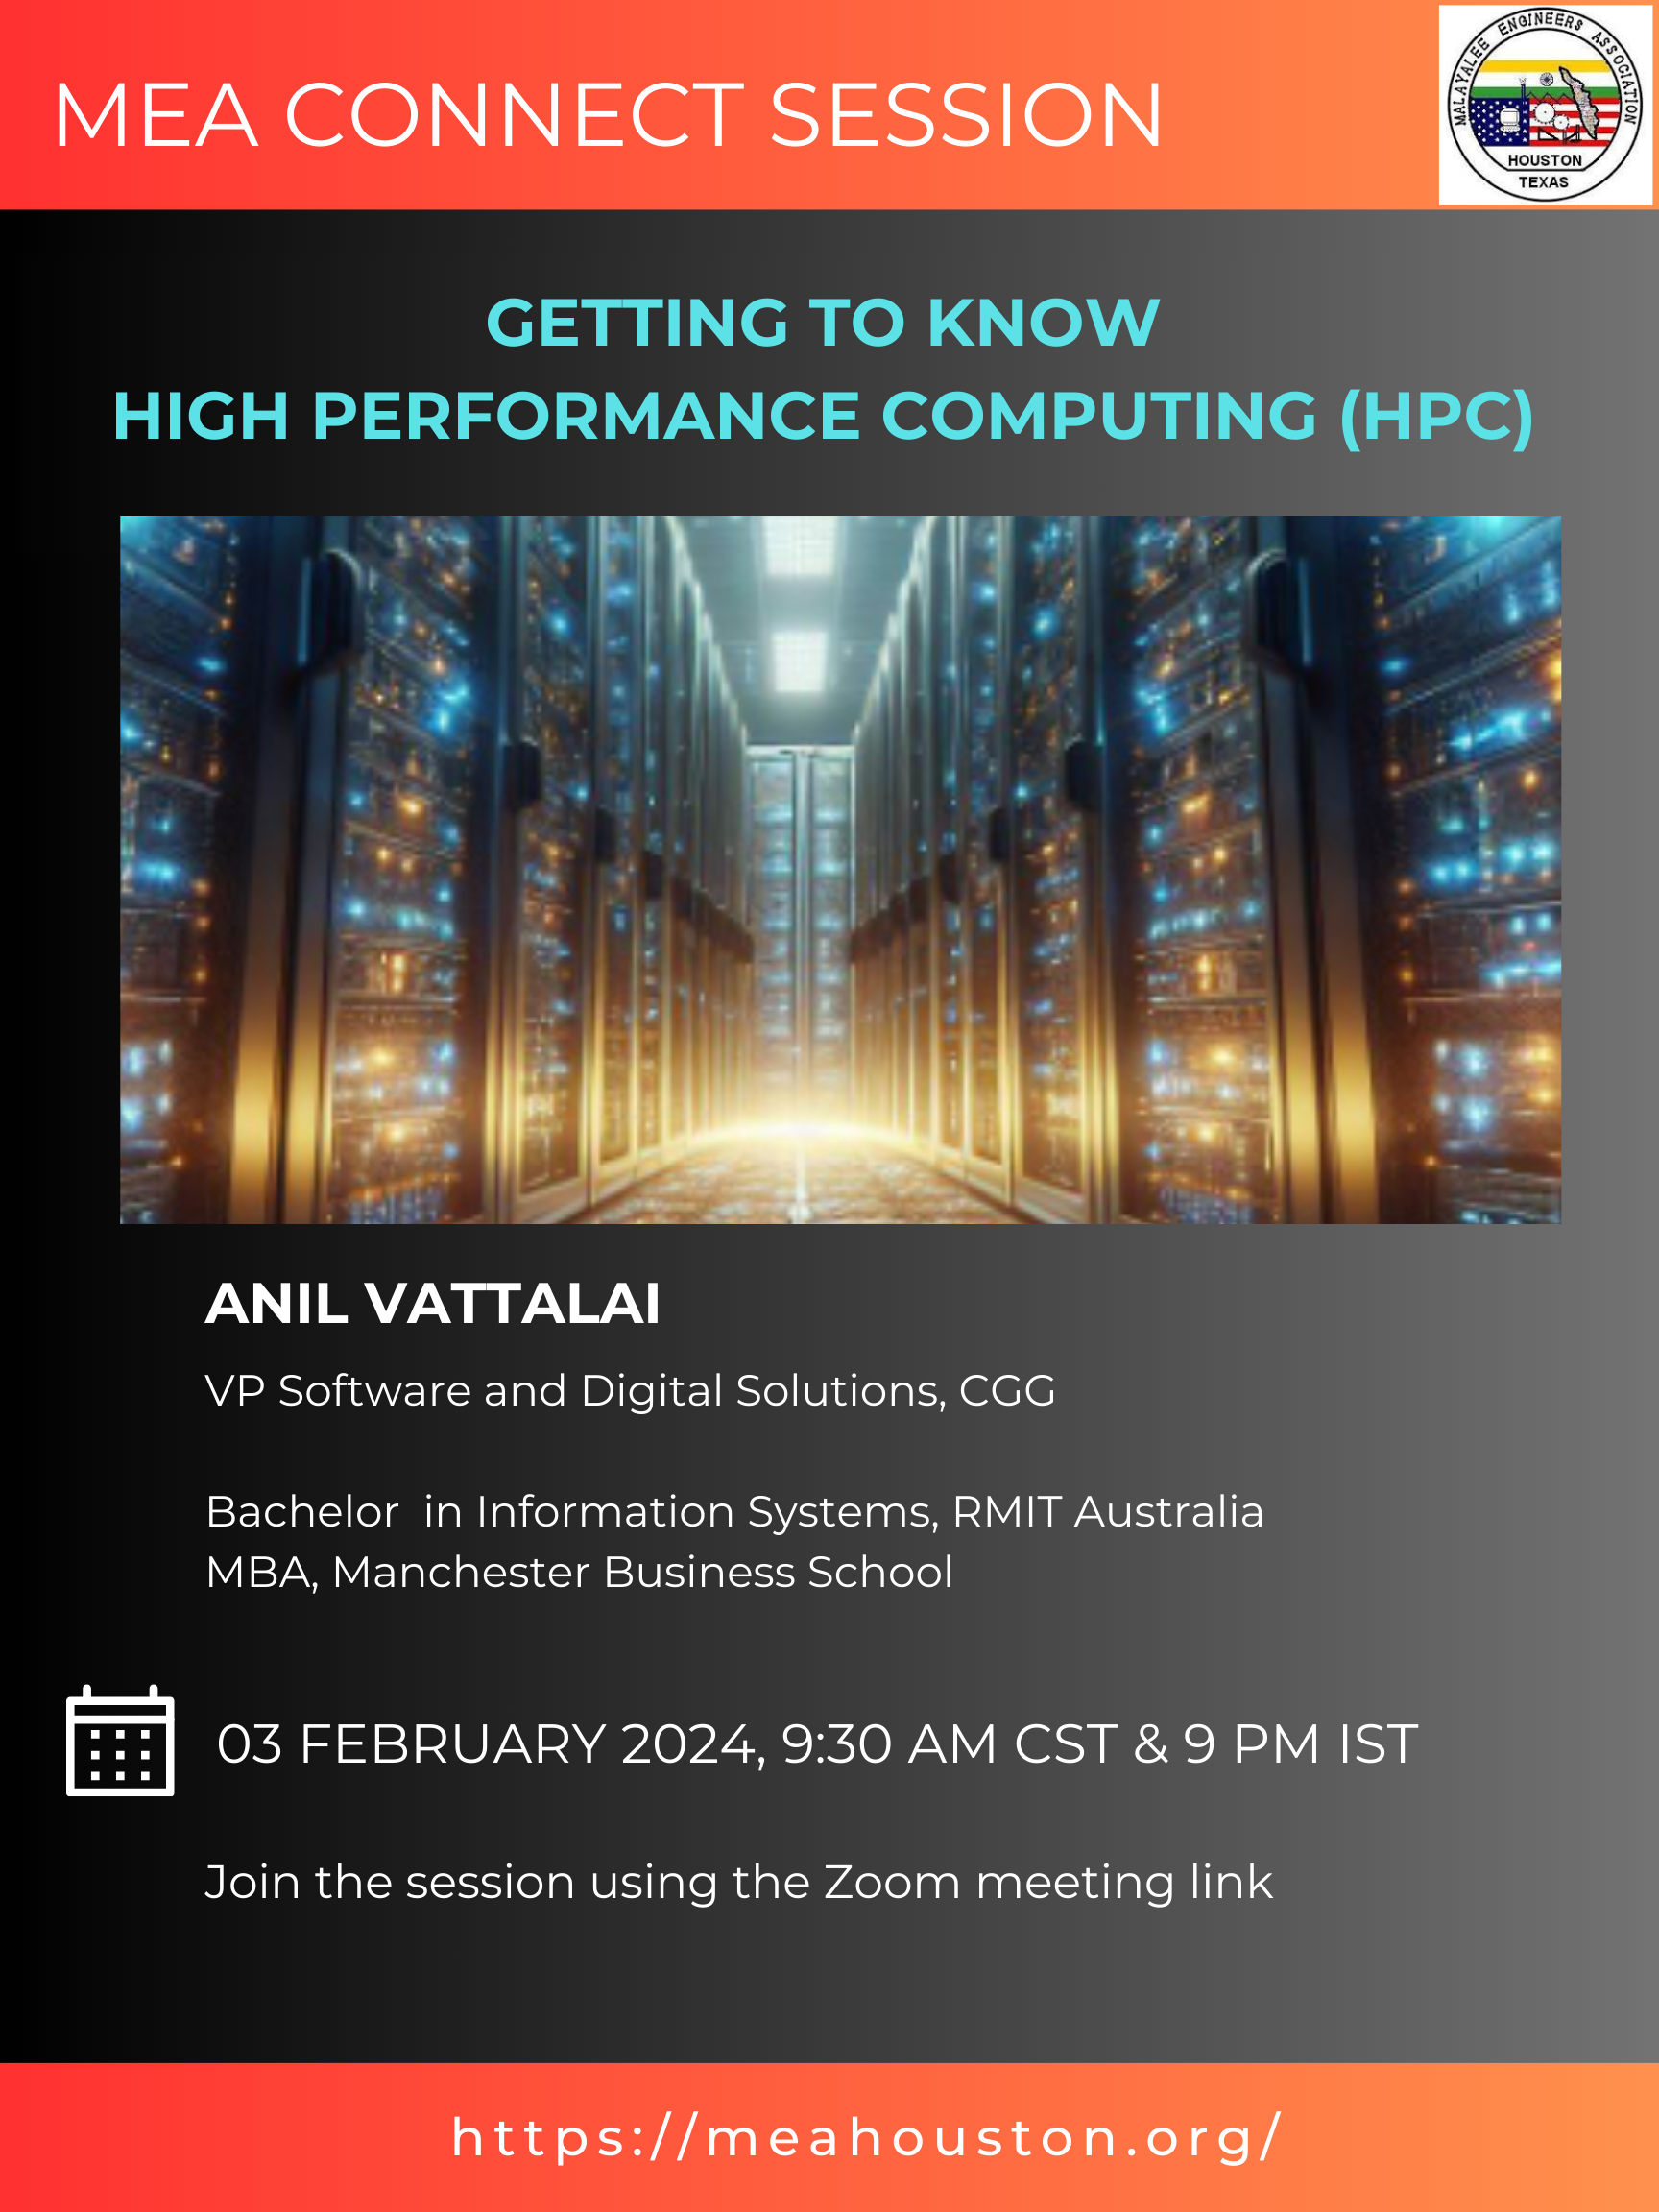 Getting to know High Performance Computing (HPC)